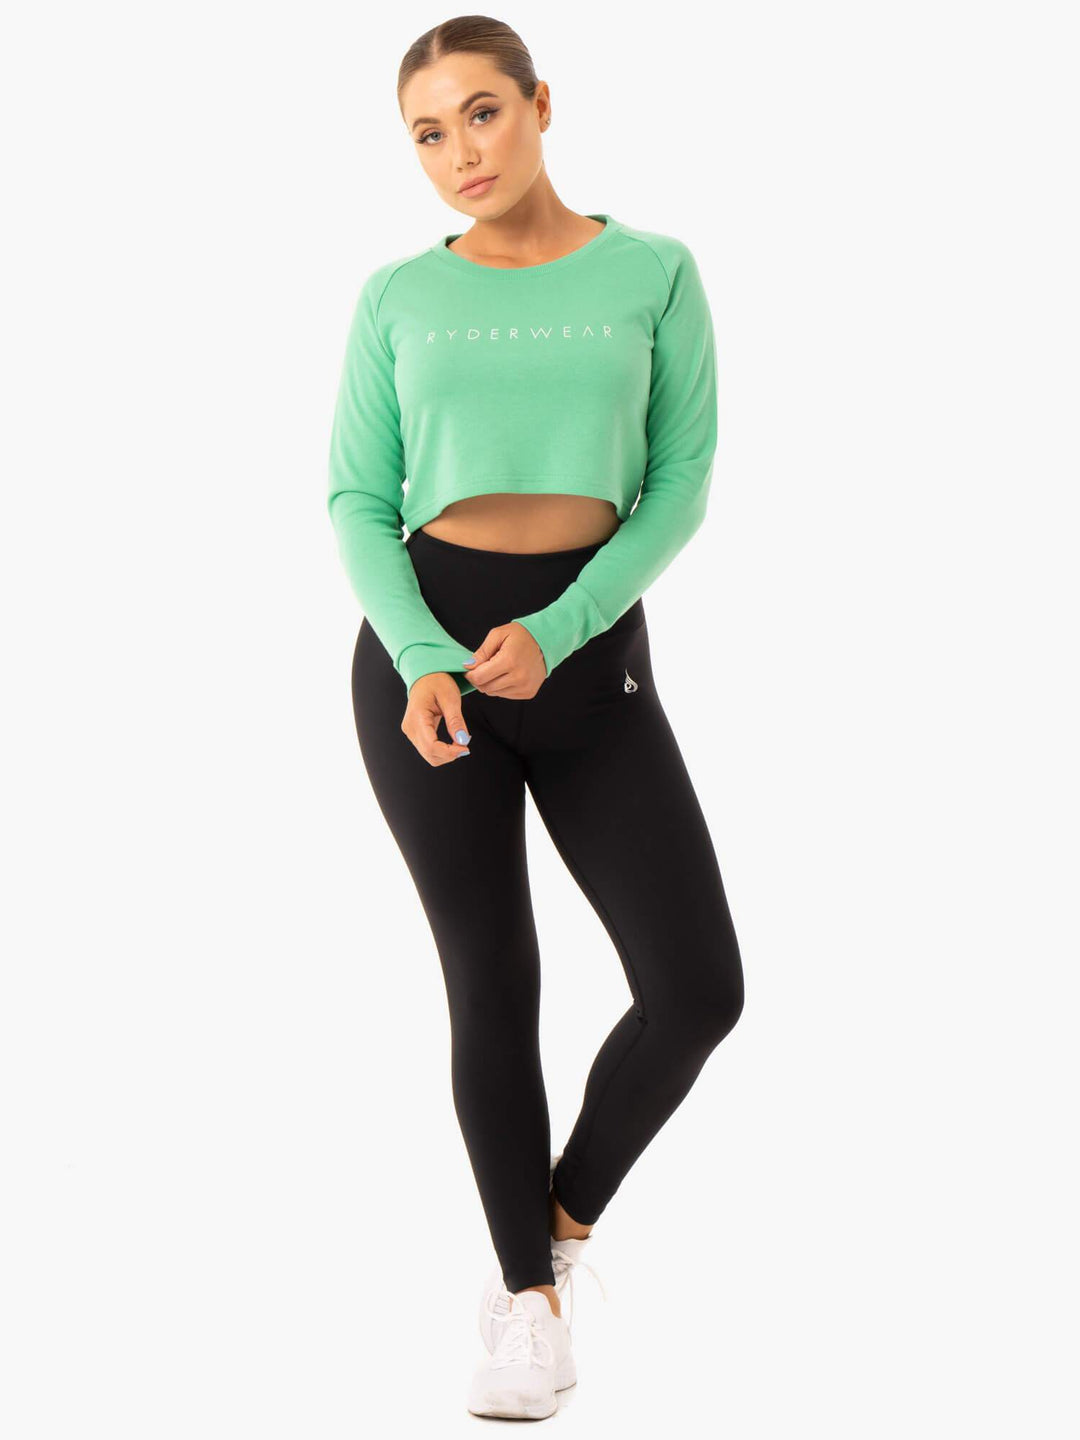 Staples Cropped Sweater - Neomint Clothing Ryderwear 